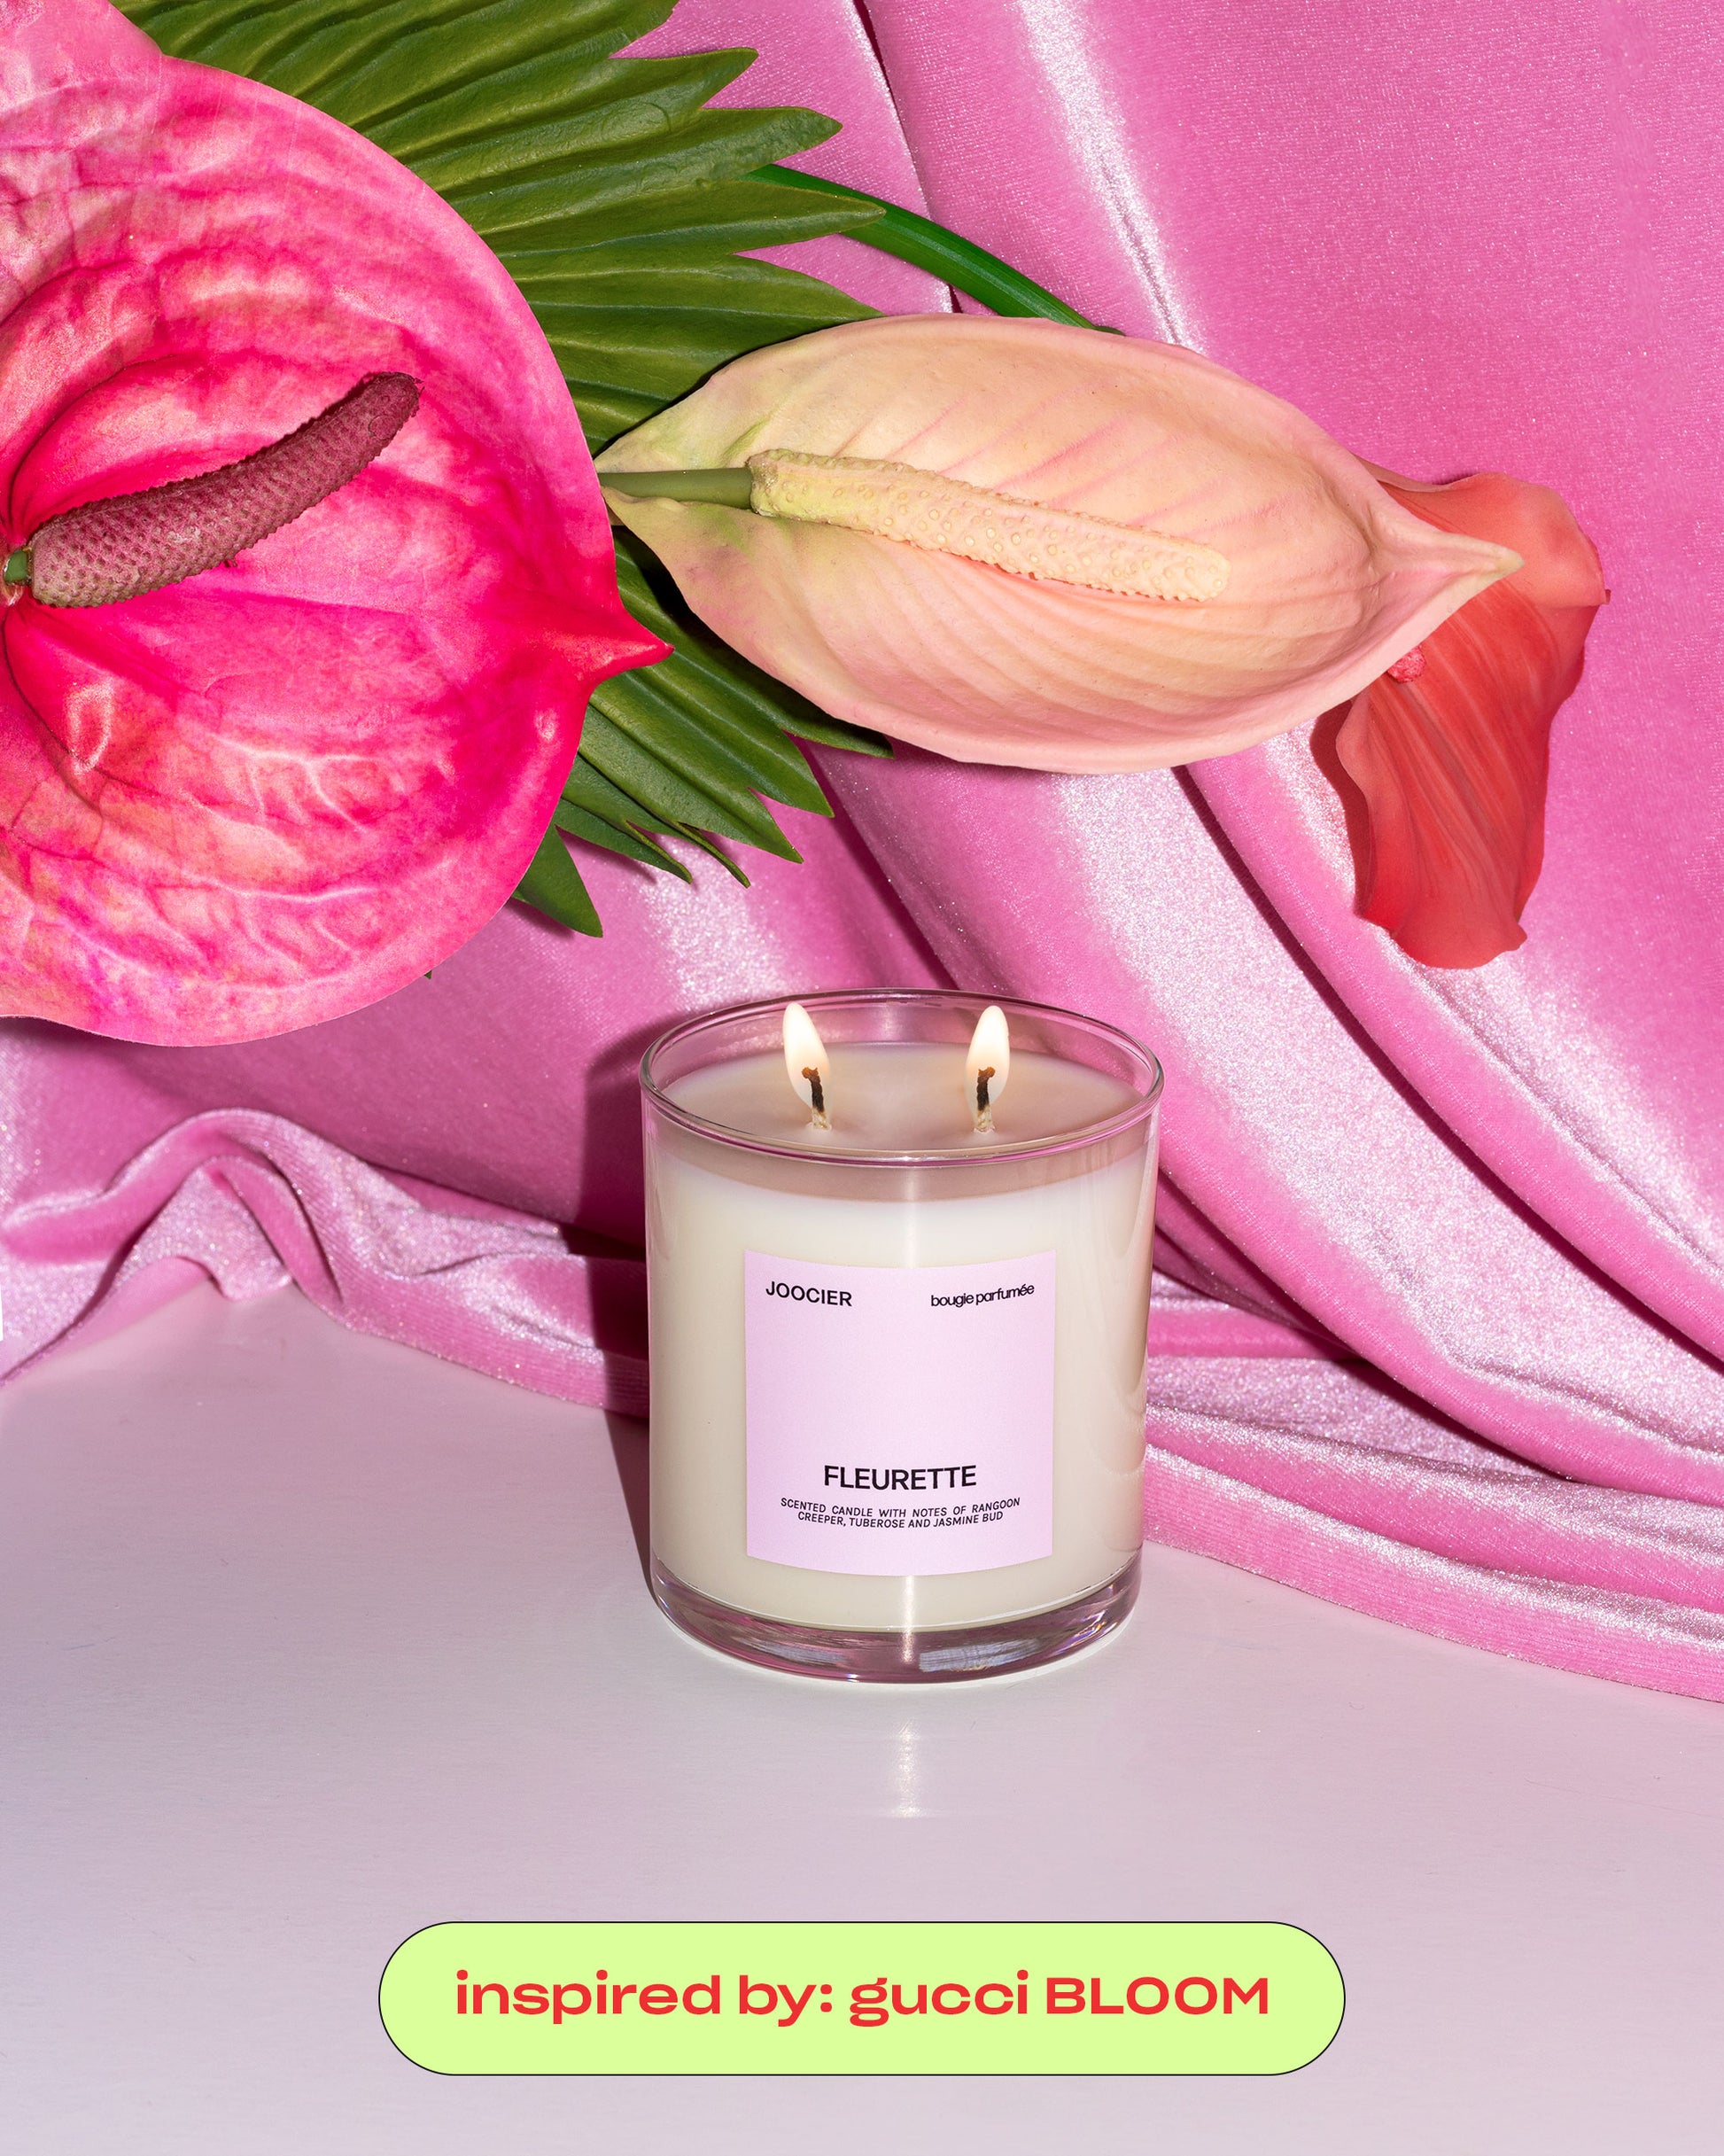 Gucci Bloom dupe candle